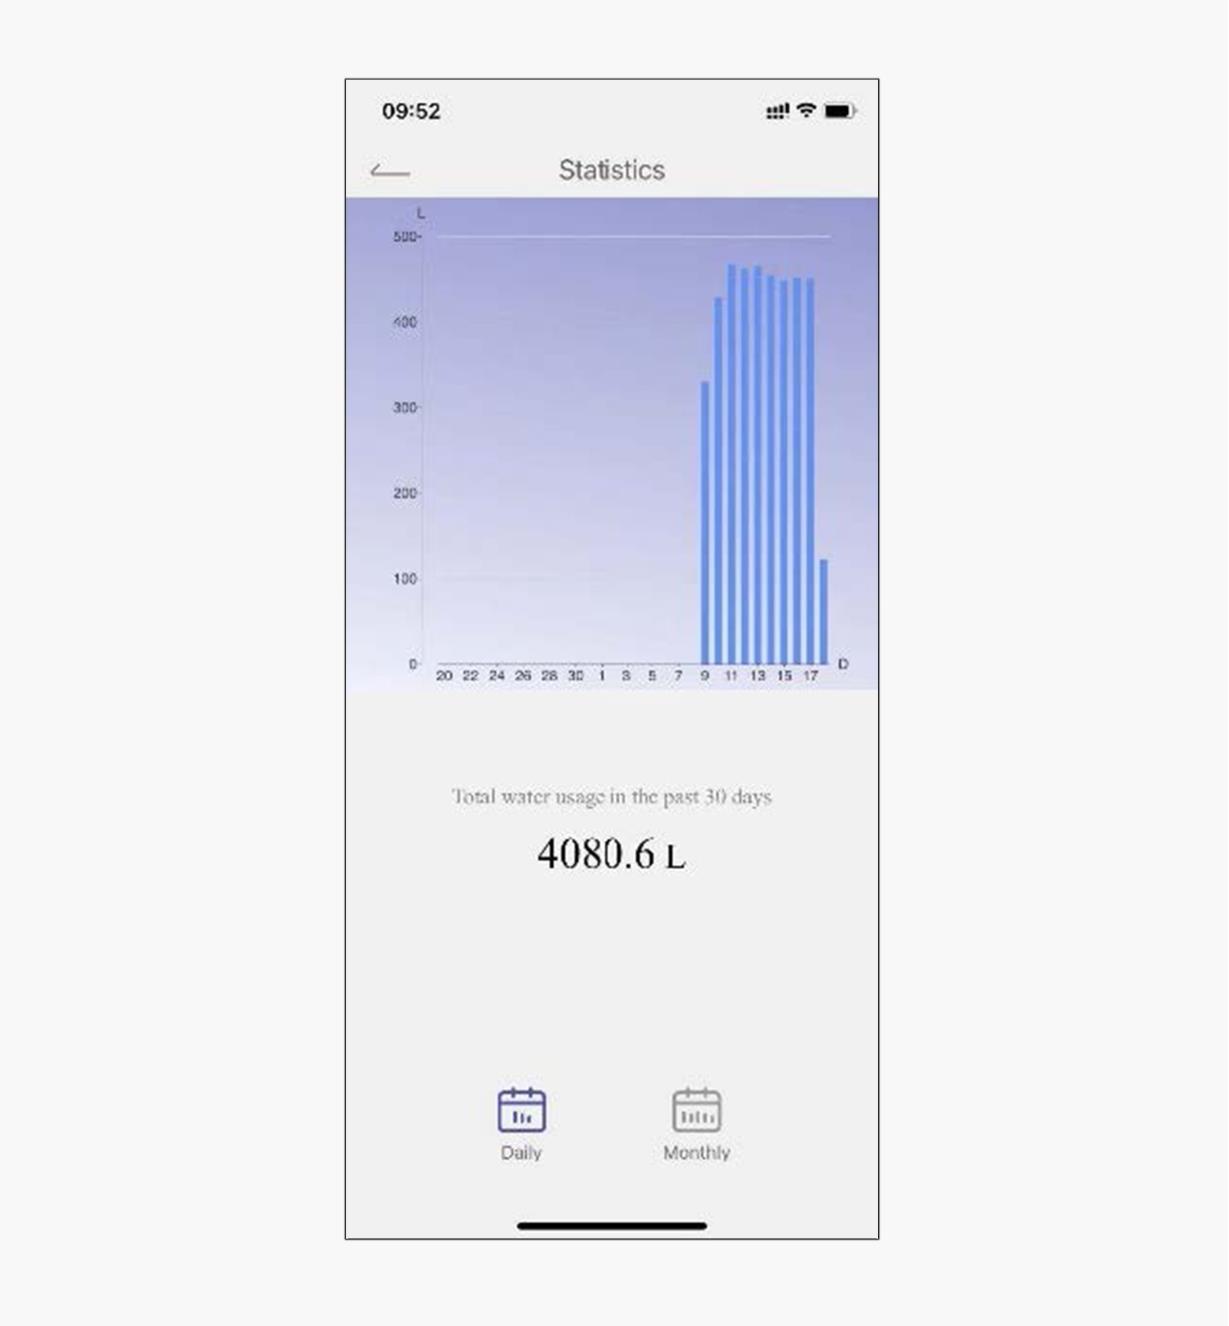 A screenshot showing a water usage graph from the app that controls the one-zone water timer